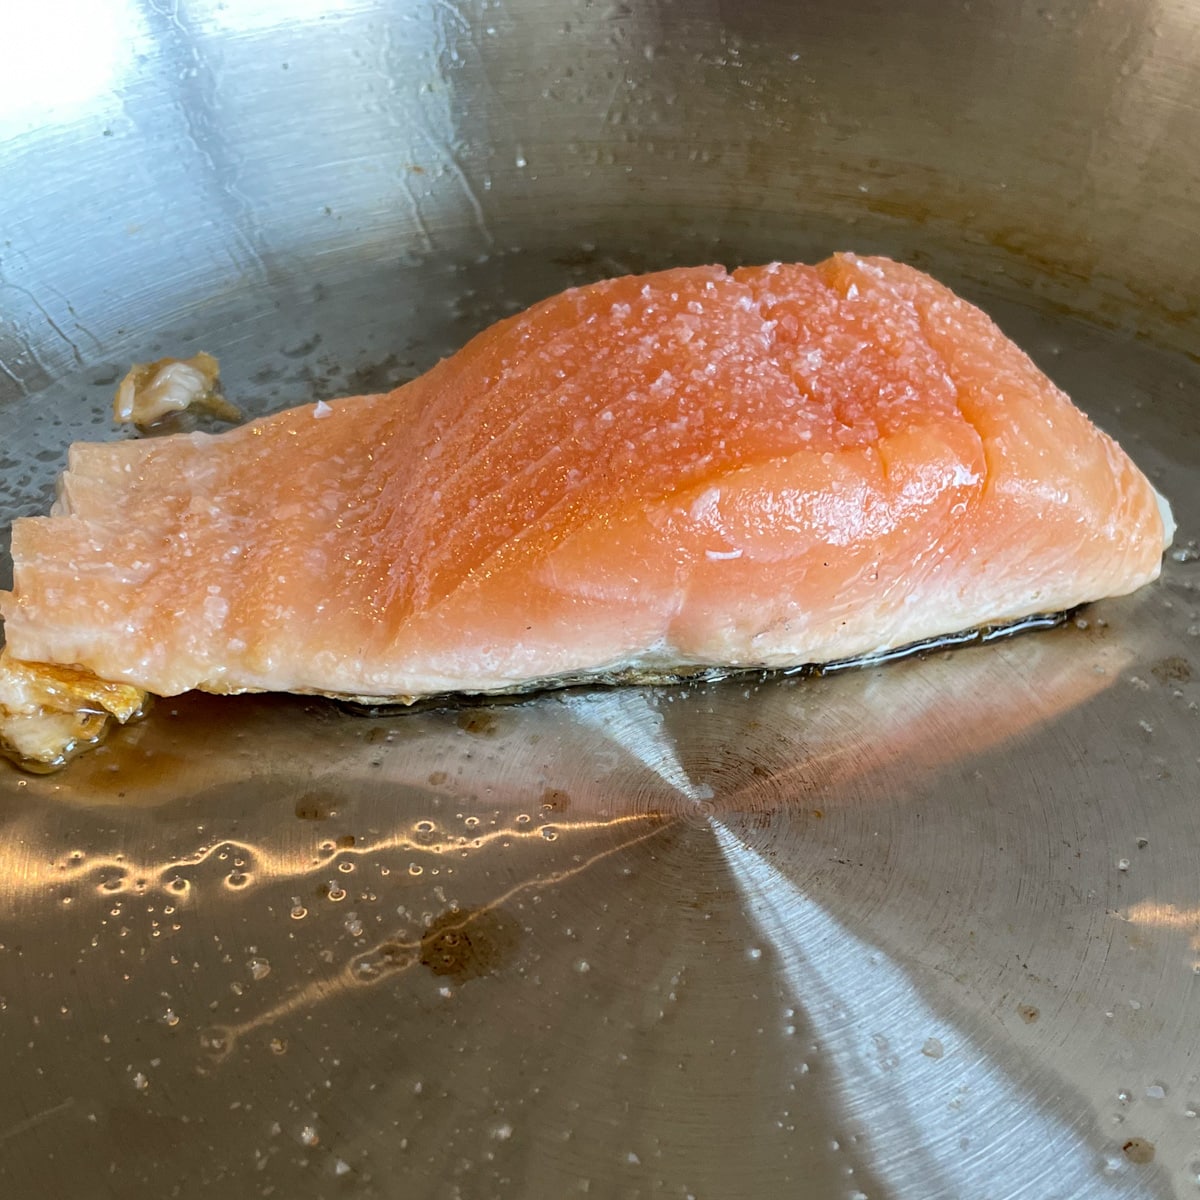 A fillet of salmon is cooking in a stainless steel pan with olive oil and salt. The salmon changes color halfway through, showing it is half cooked.